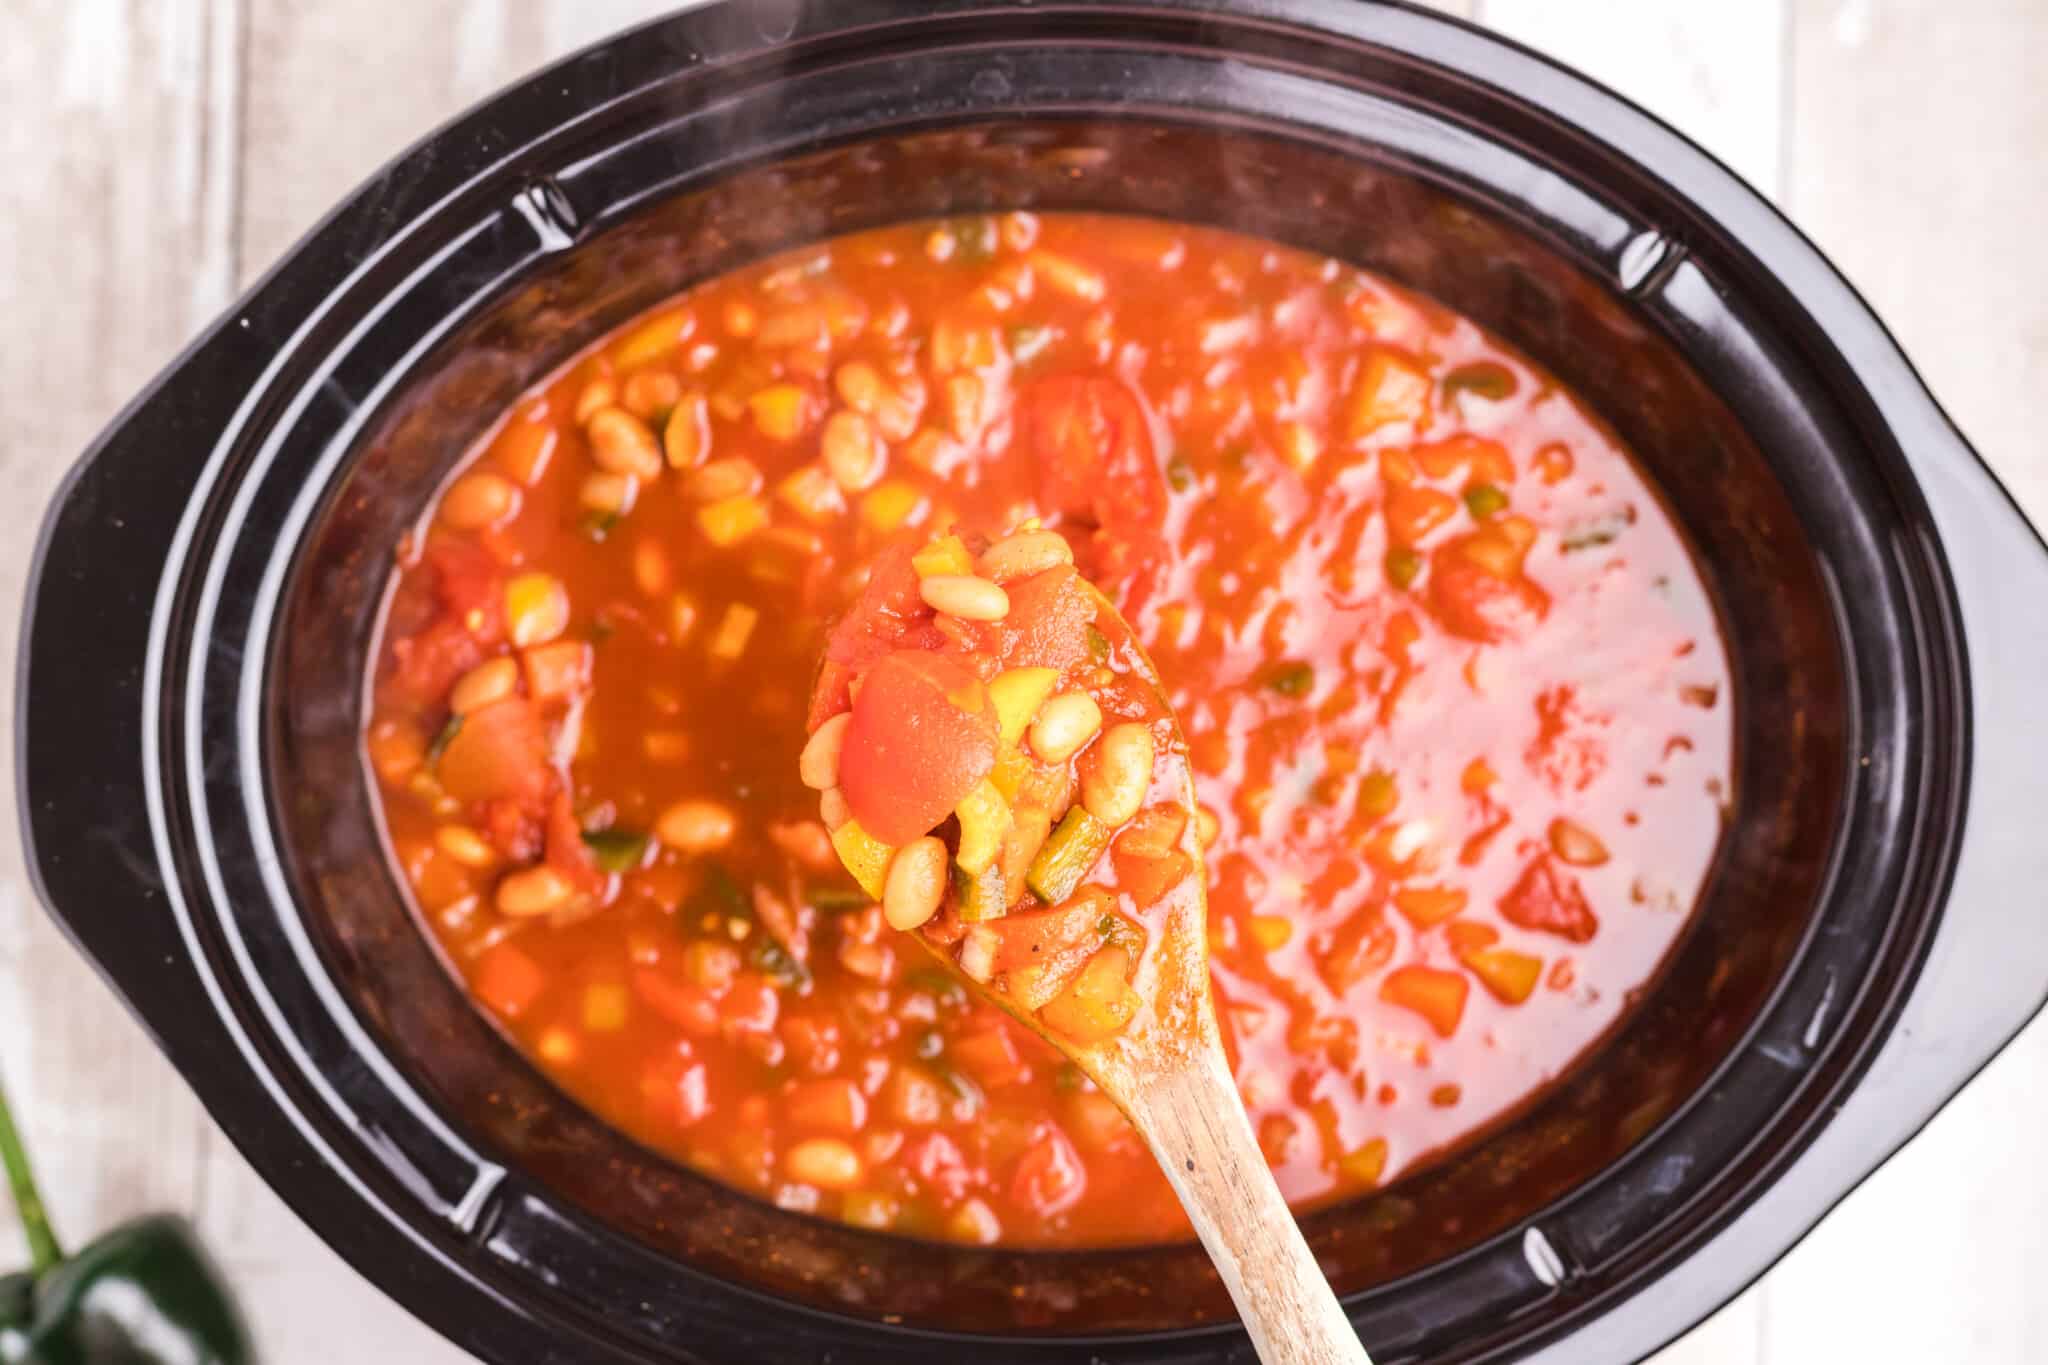 cooked vegetarian chili in slow cooker and on wooden spoon.